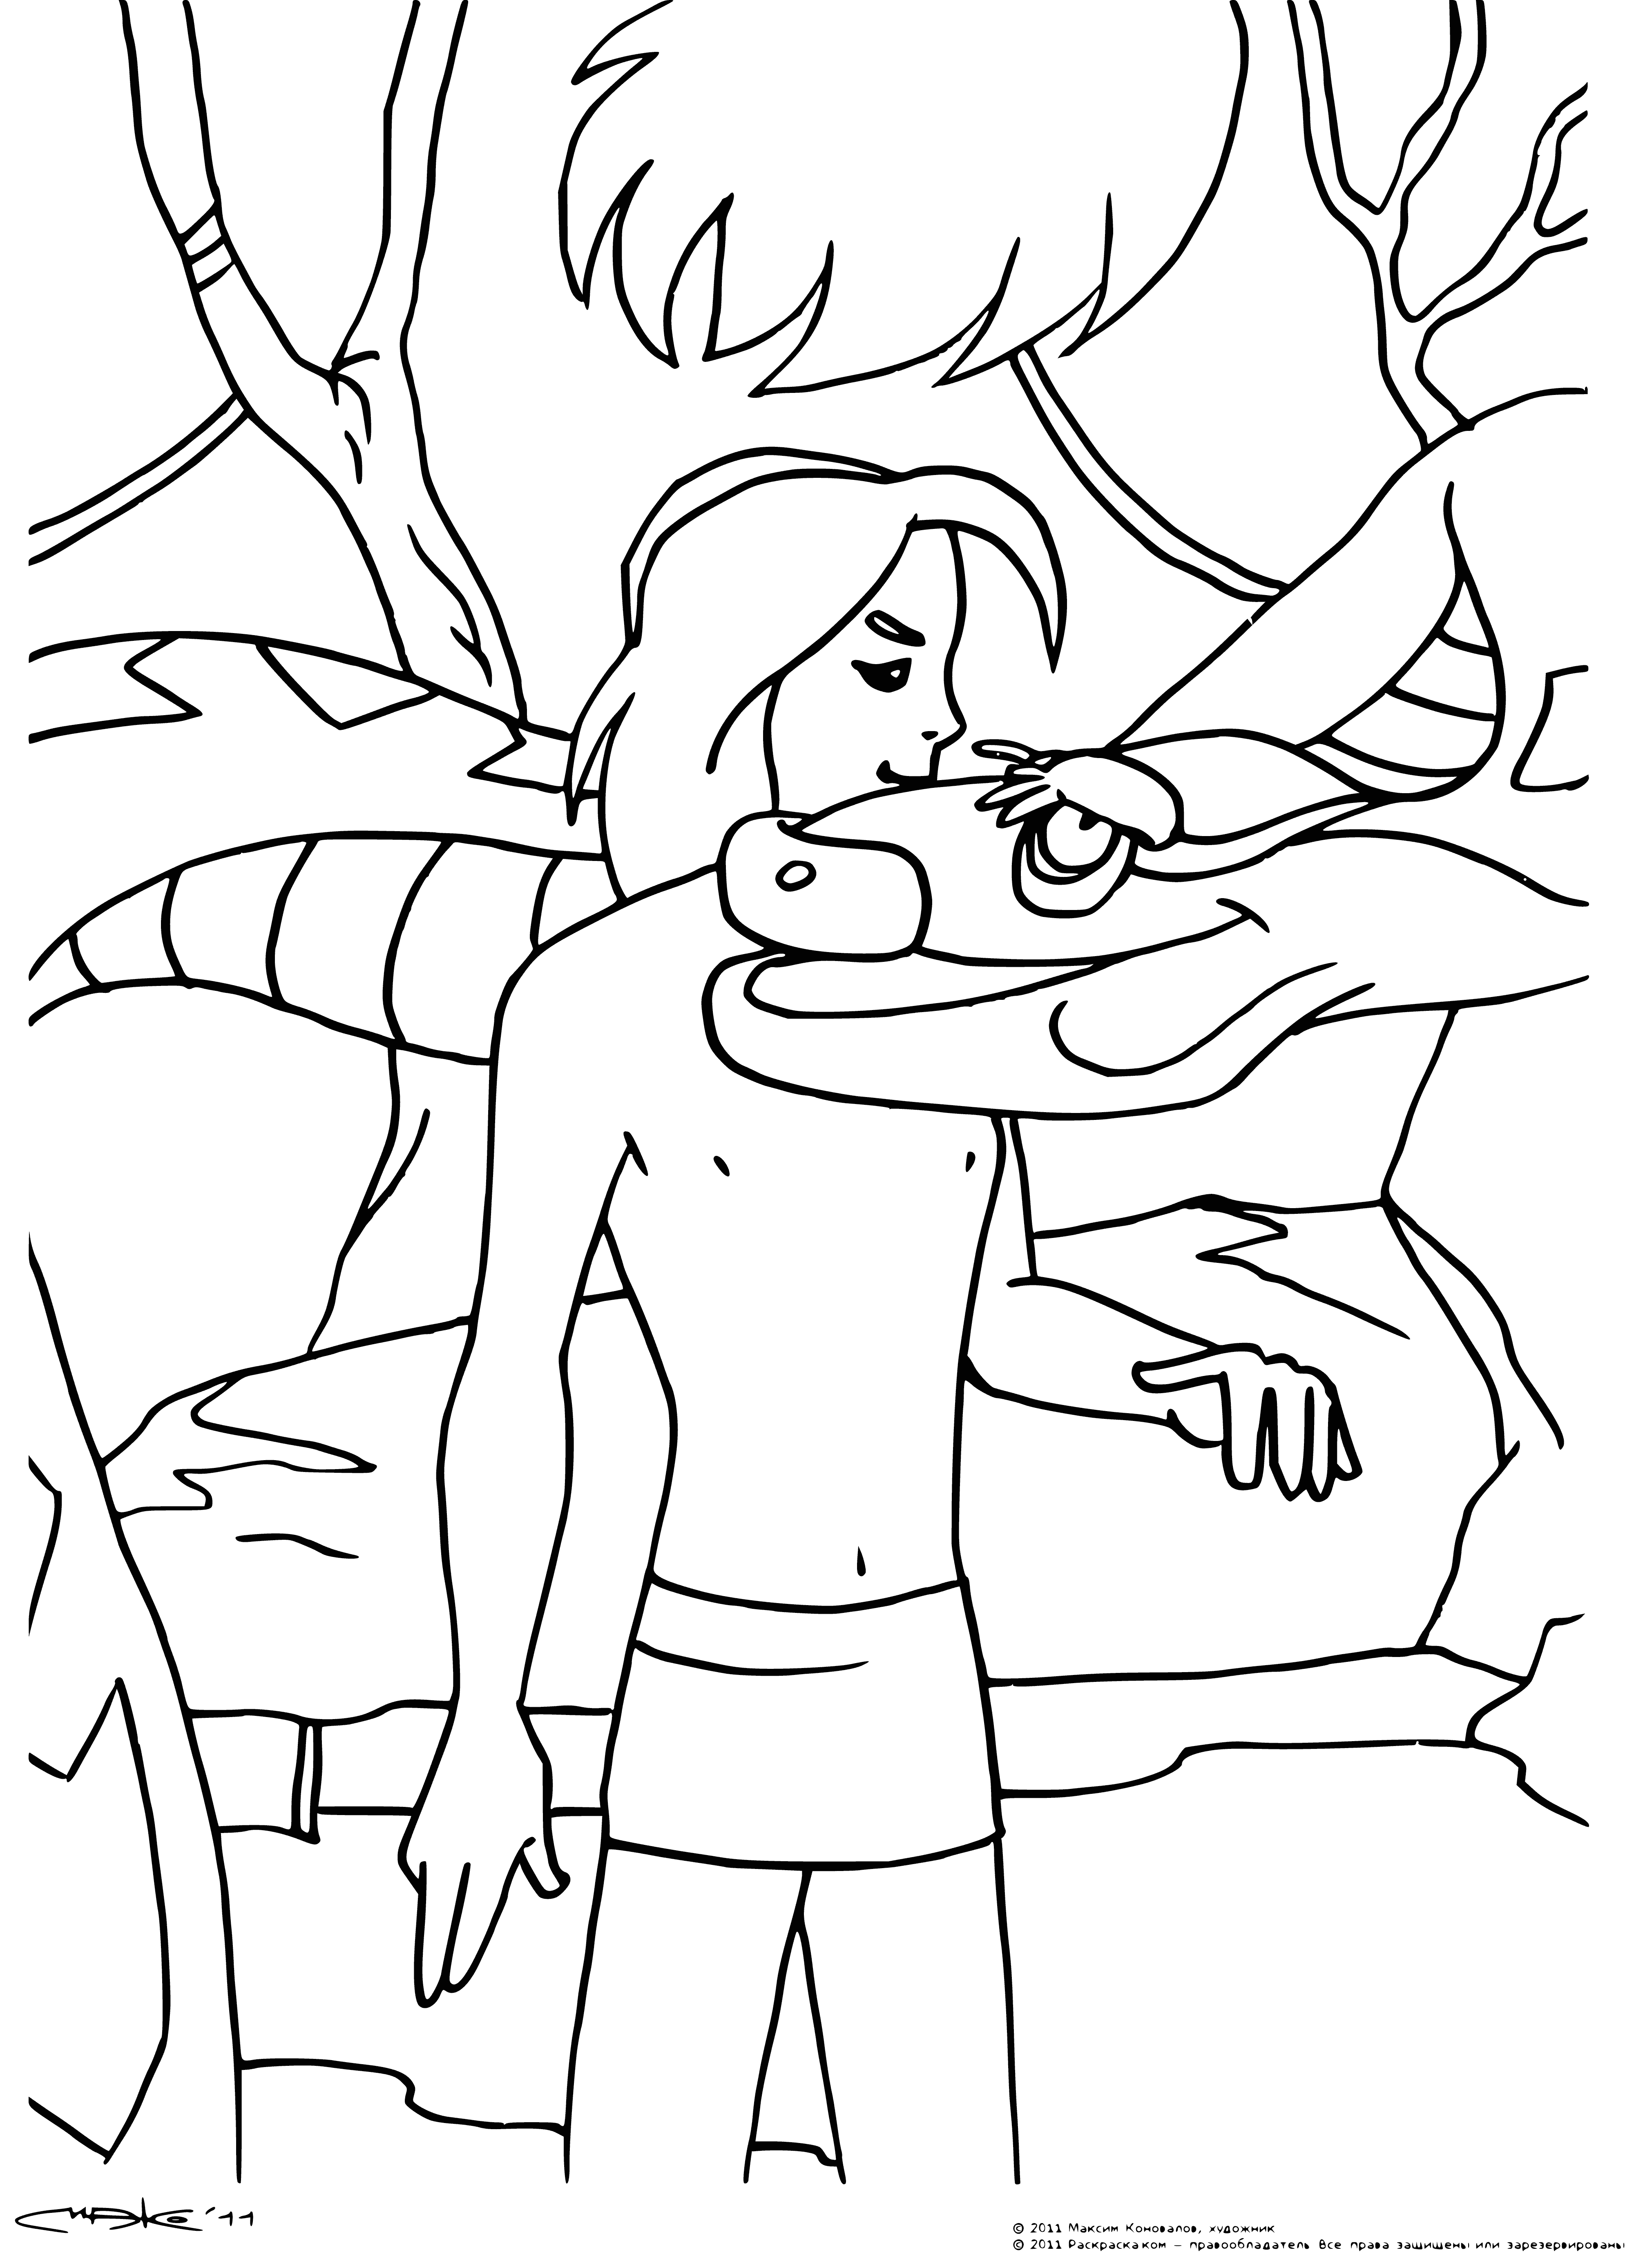 coloring page: Mowgli stands on Kaa's coils, scared as the large snake wraps itself around a tree & bares its open mouth.